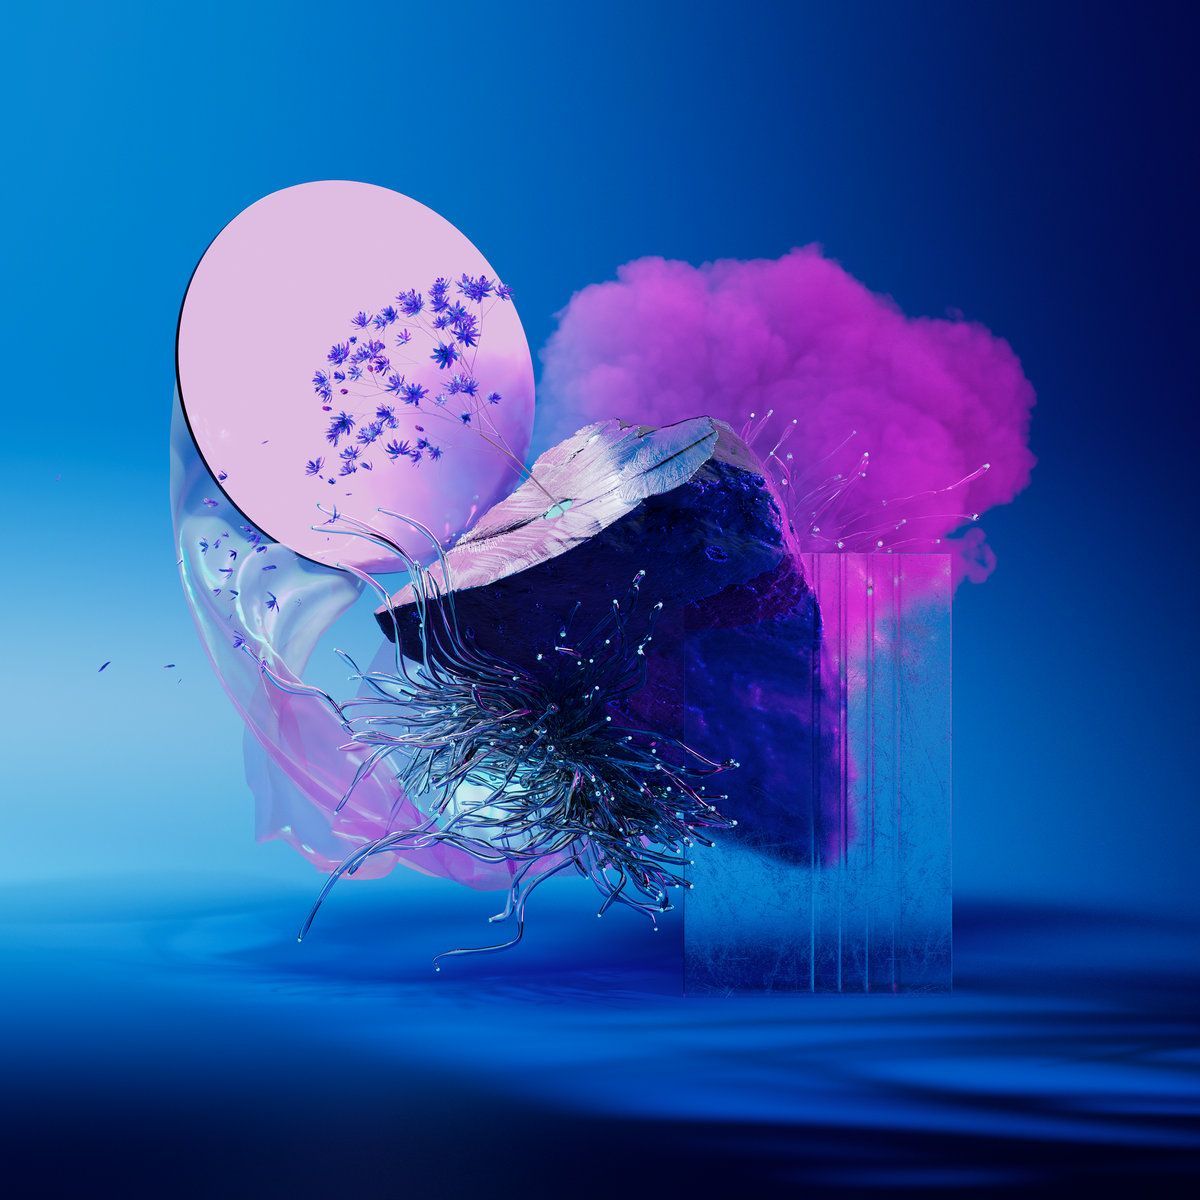 A digital artwork with a blue background and a pink cloud. - Balance